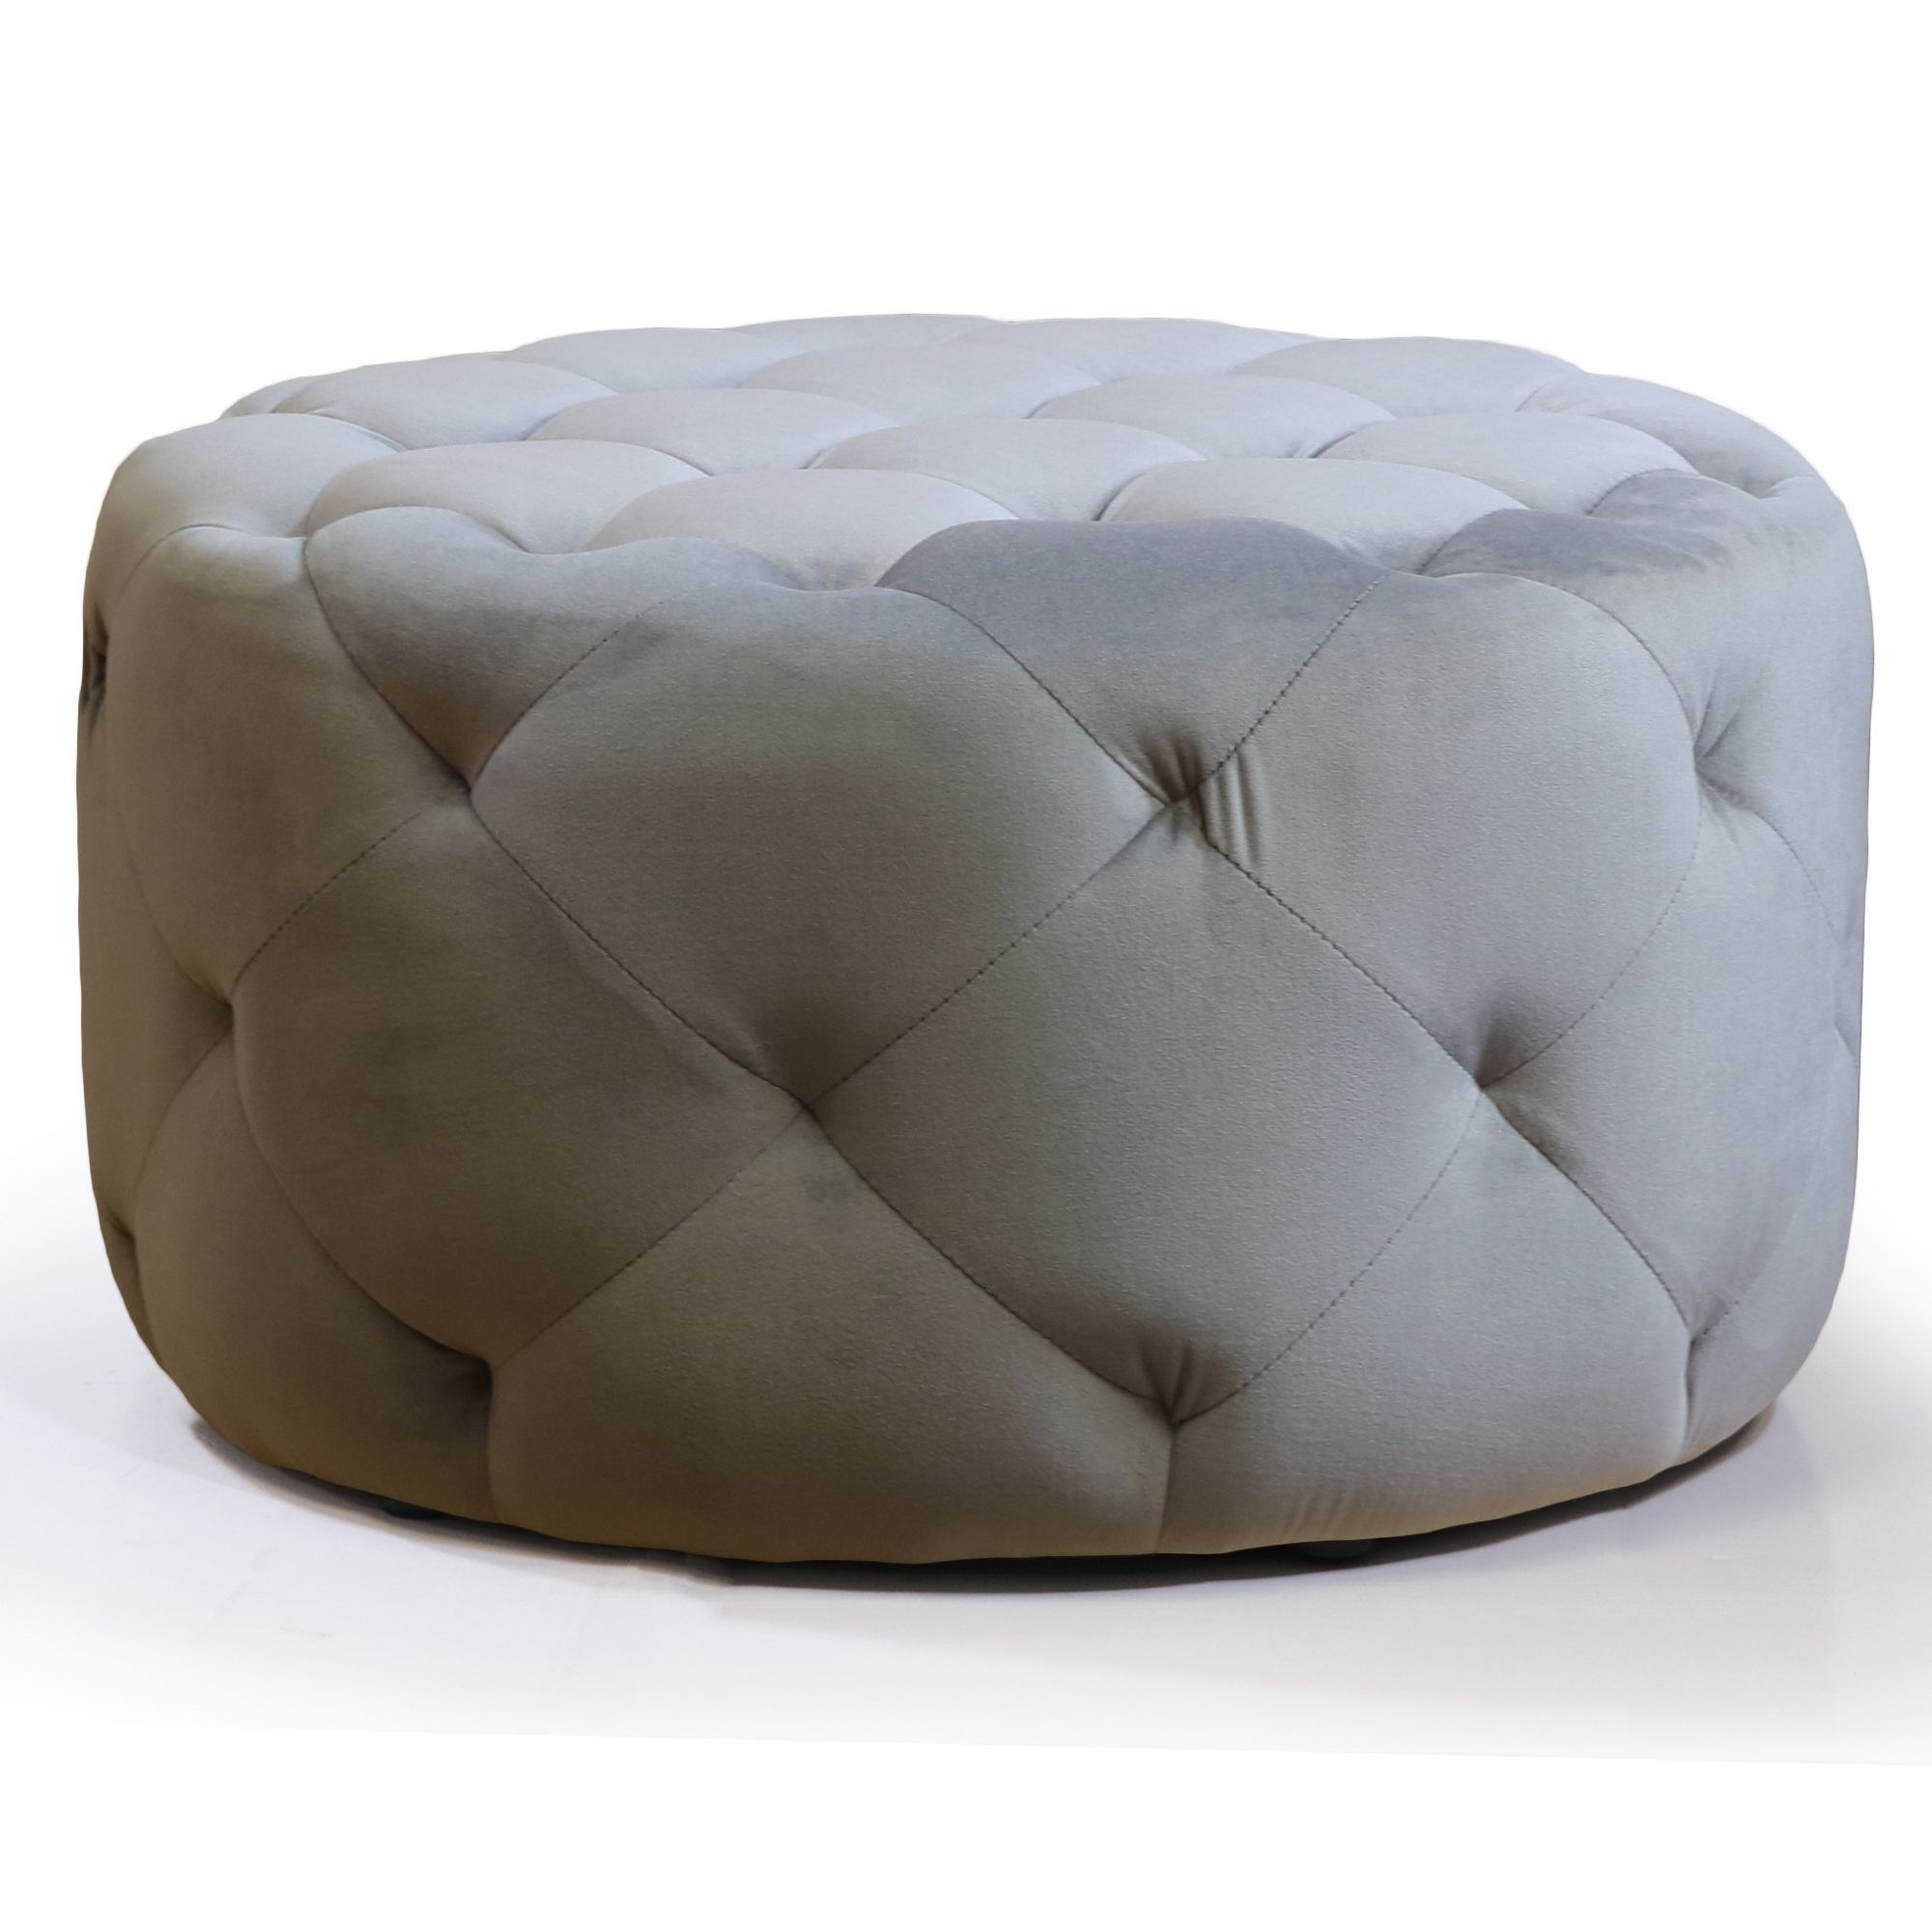 Warehouse Of Tiffany Meerna 24 Inch Round Tufted Padded Ottoman Within Textured Aqua Round Pouf Ottomans (View 7 of 20)